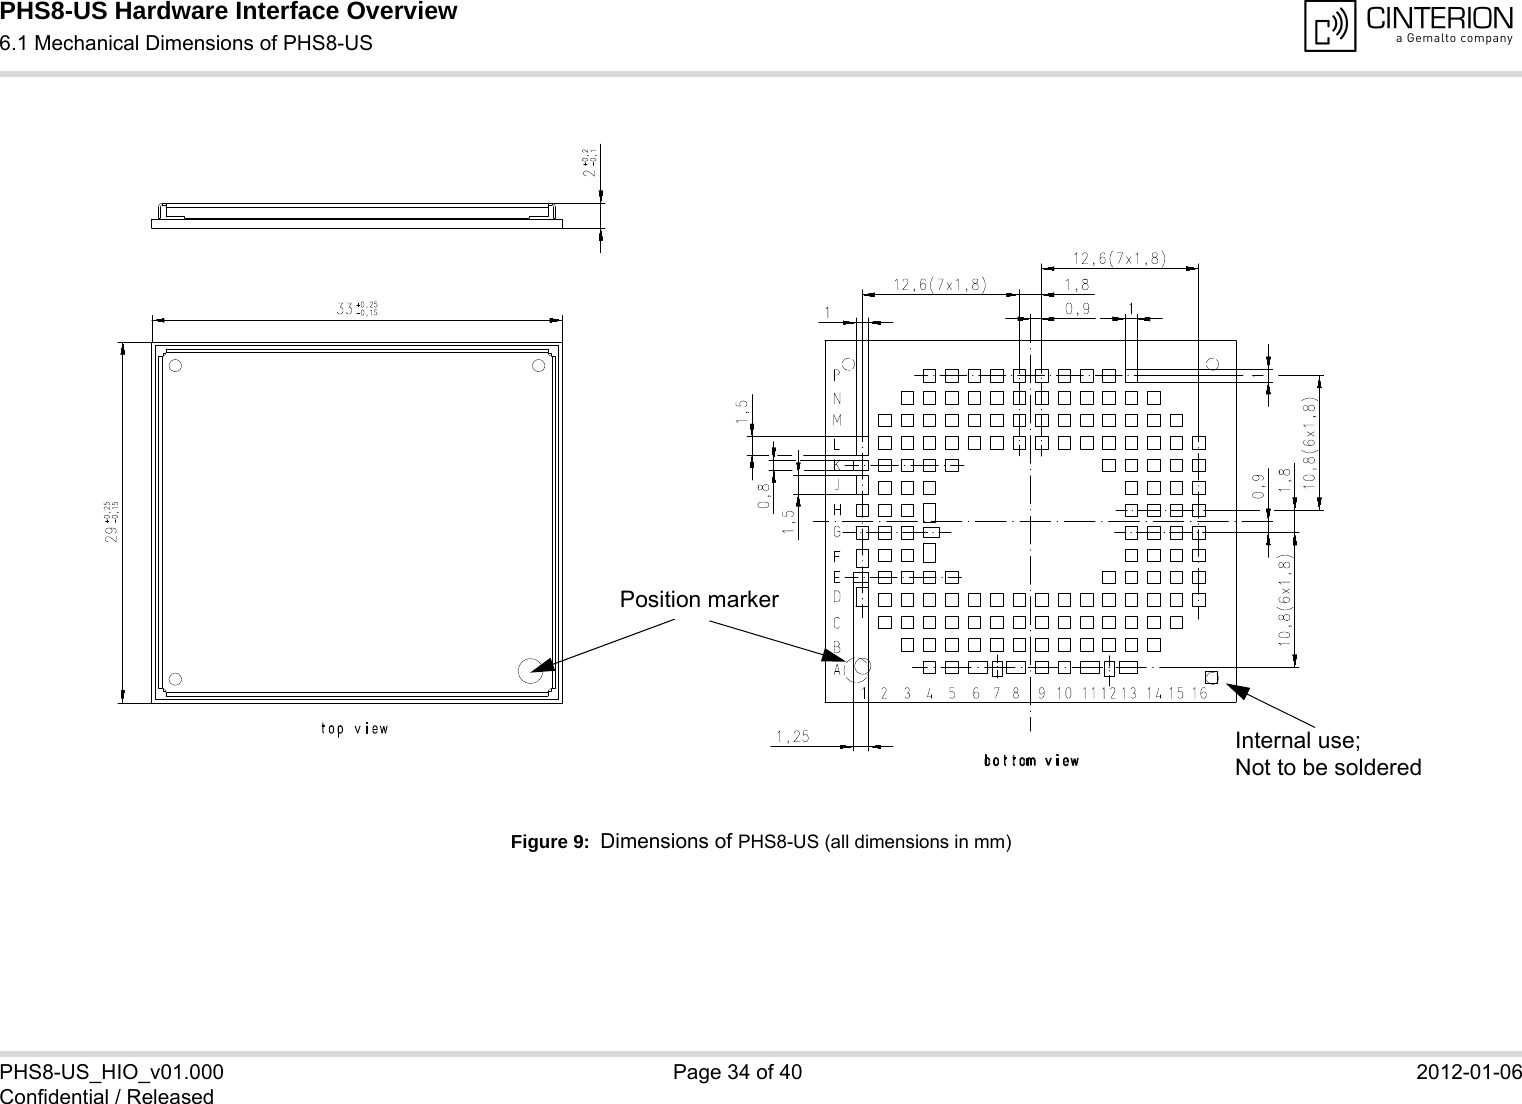 PHS8-US Hardware Interface Overview6.1 Mechanical Dimensions of PHS8-US34PHS8-US_HIO_v01.000 Page 34 of 40 2012-01-06Confidential / ReleasedFigure 9:  Dimensions of PHS8-US (all dimensions in mm)Internal use; Not to be solderedPosition marker